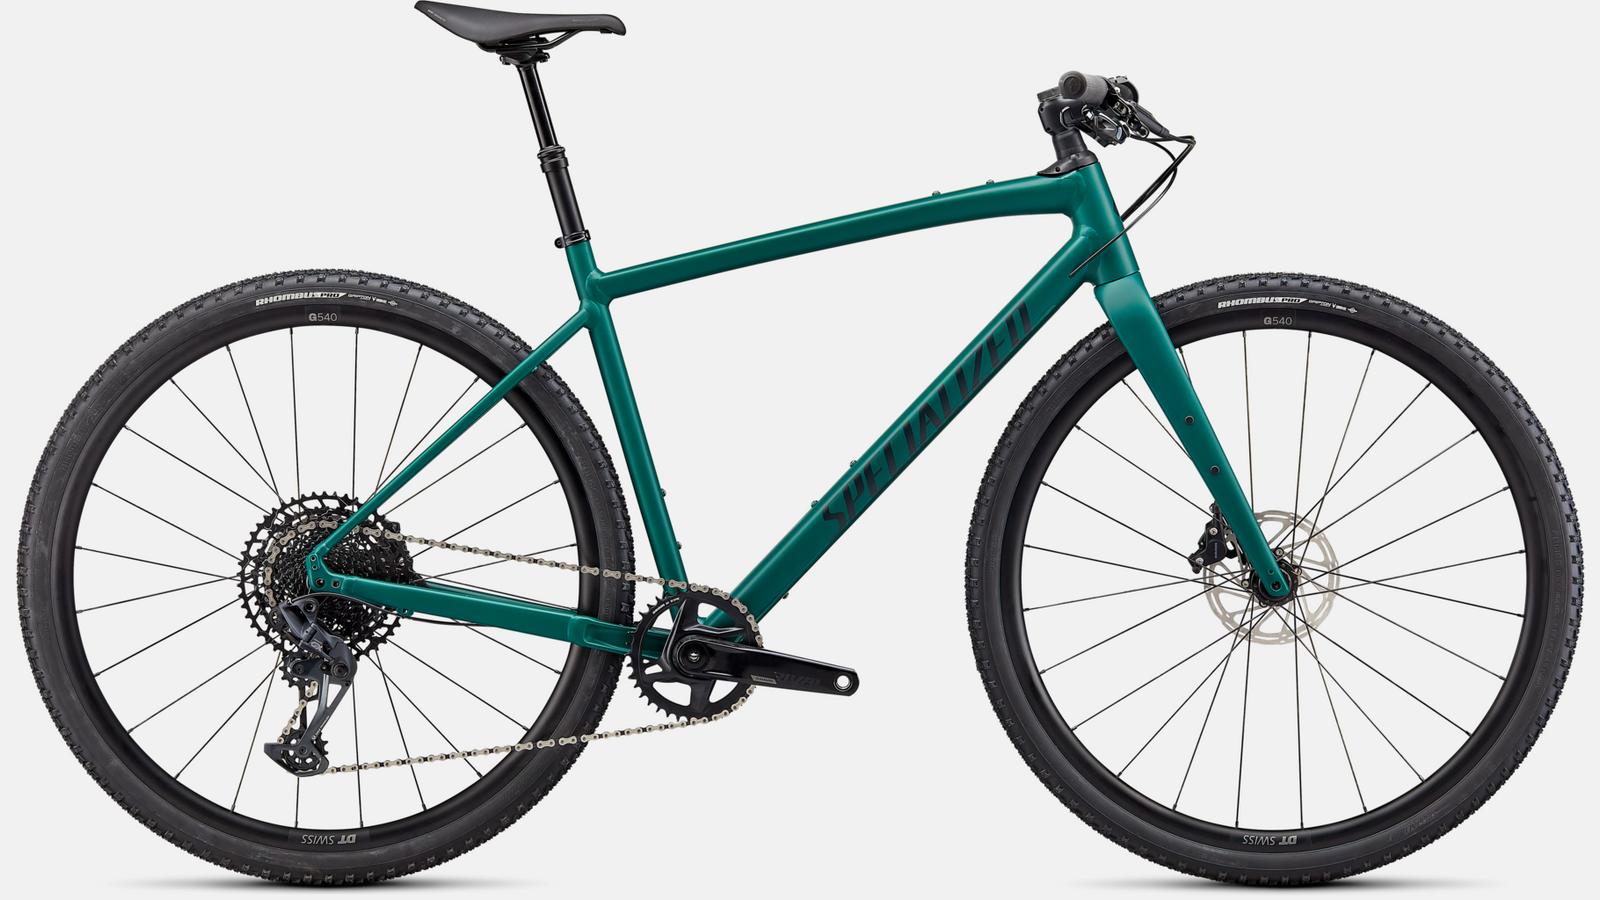 Paint for 2022 Specialized Diverge Expert E5 EVO - Satin Pine Green